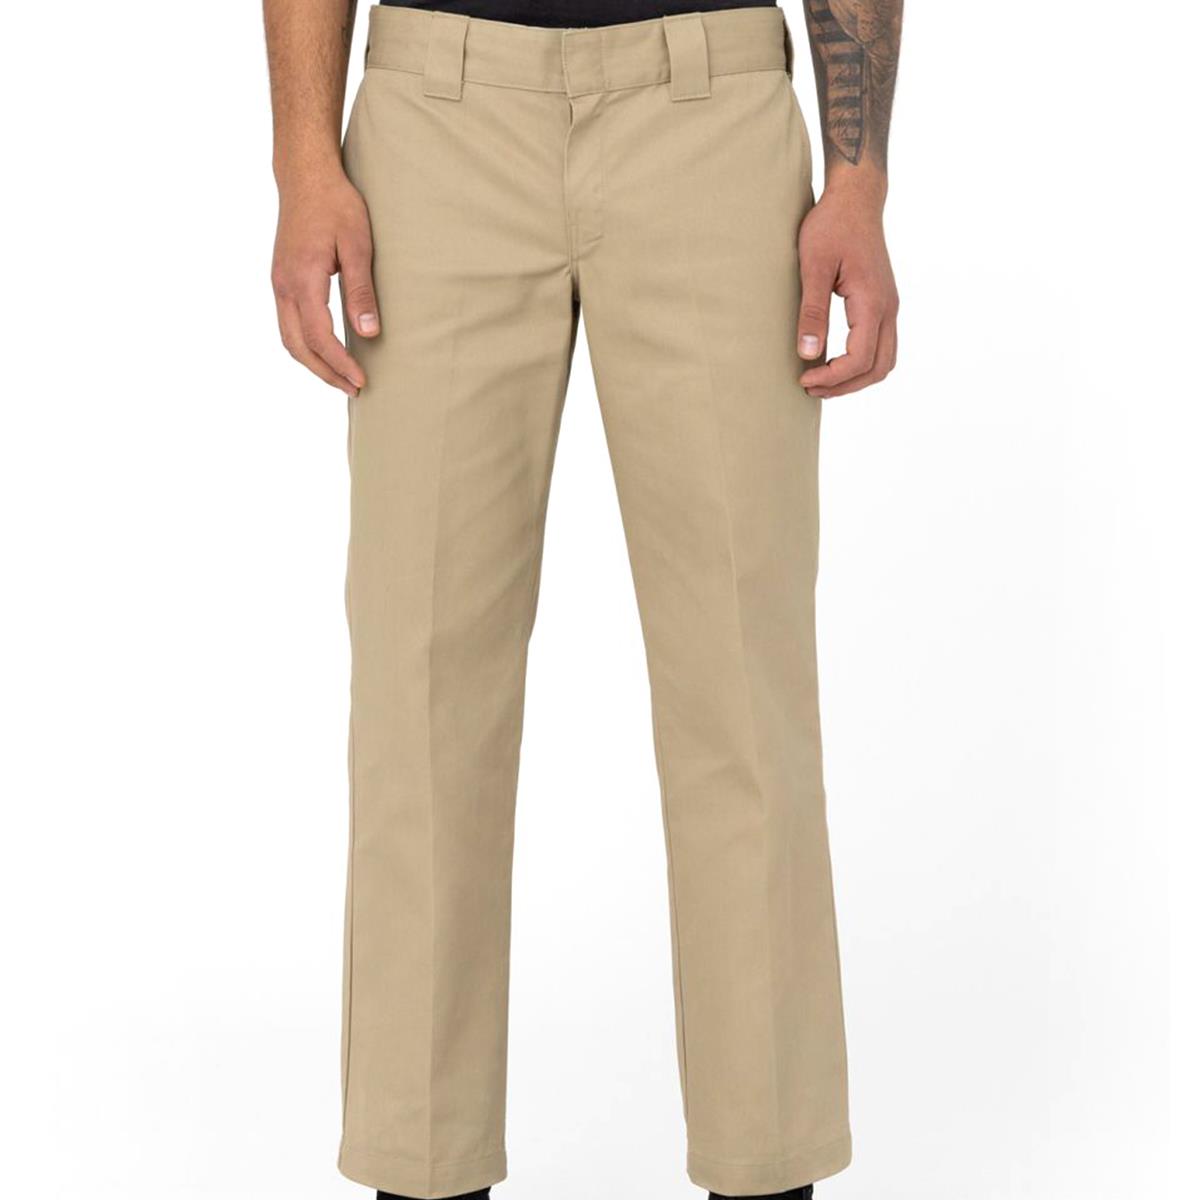 An image of Dickies 873 Workpant - Khaki 30/30 Jeans & Cords